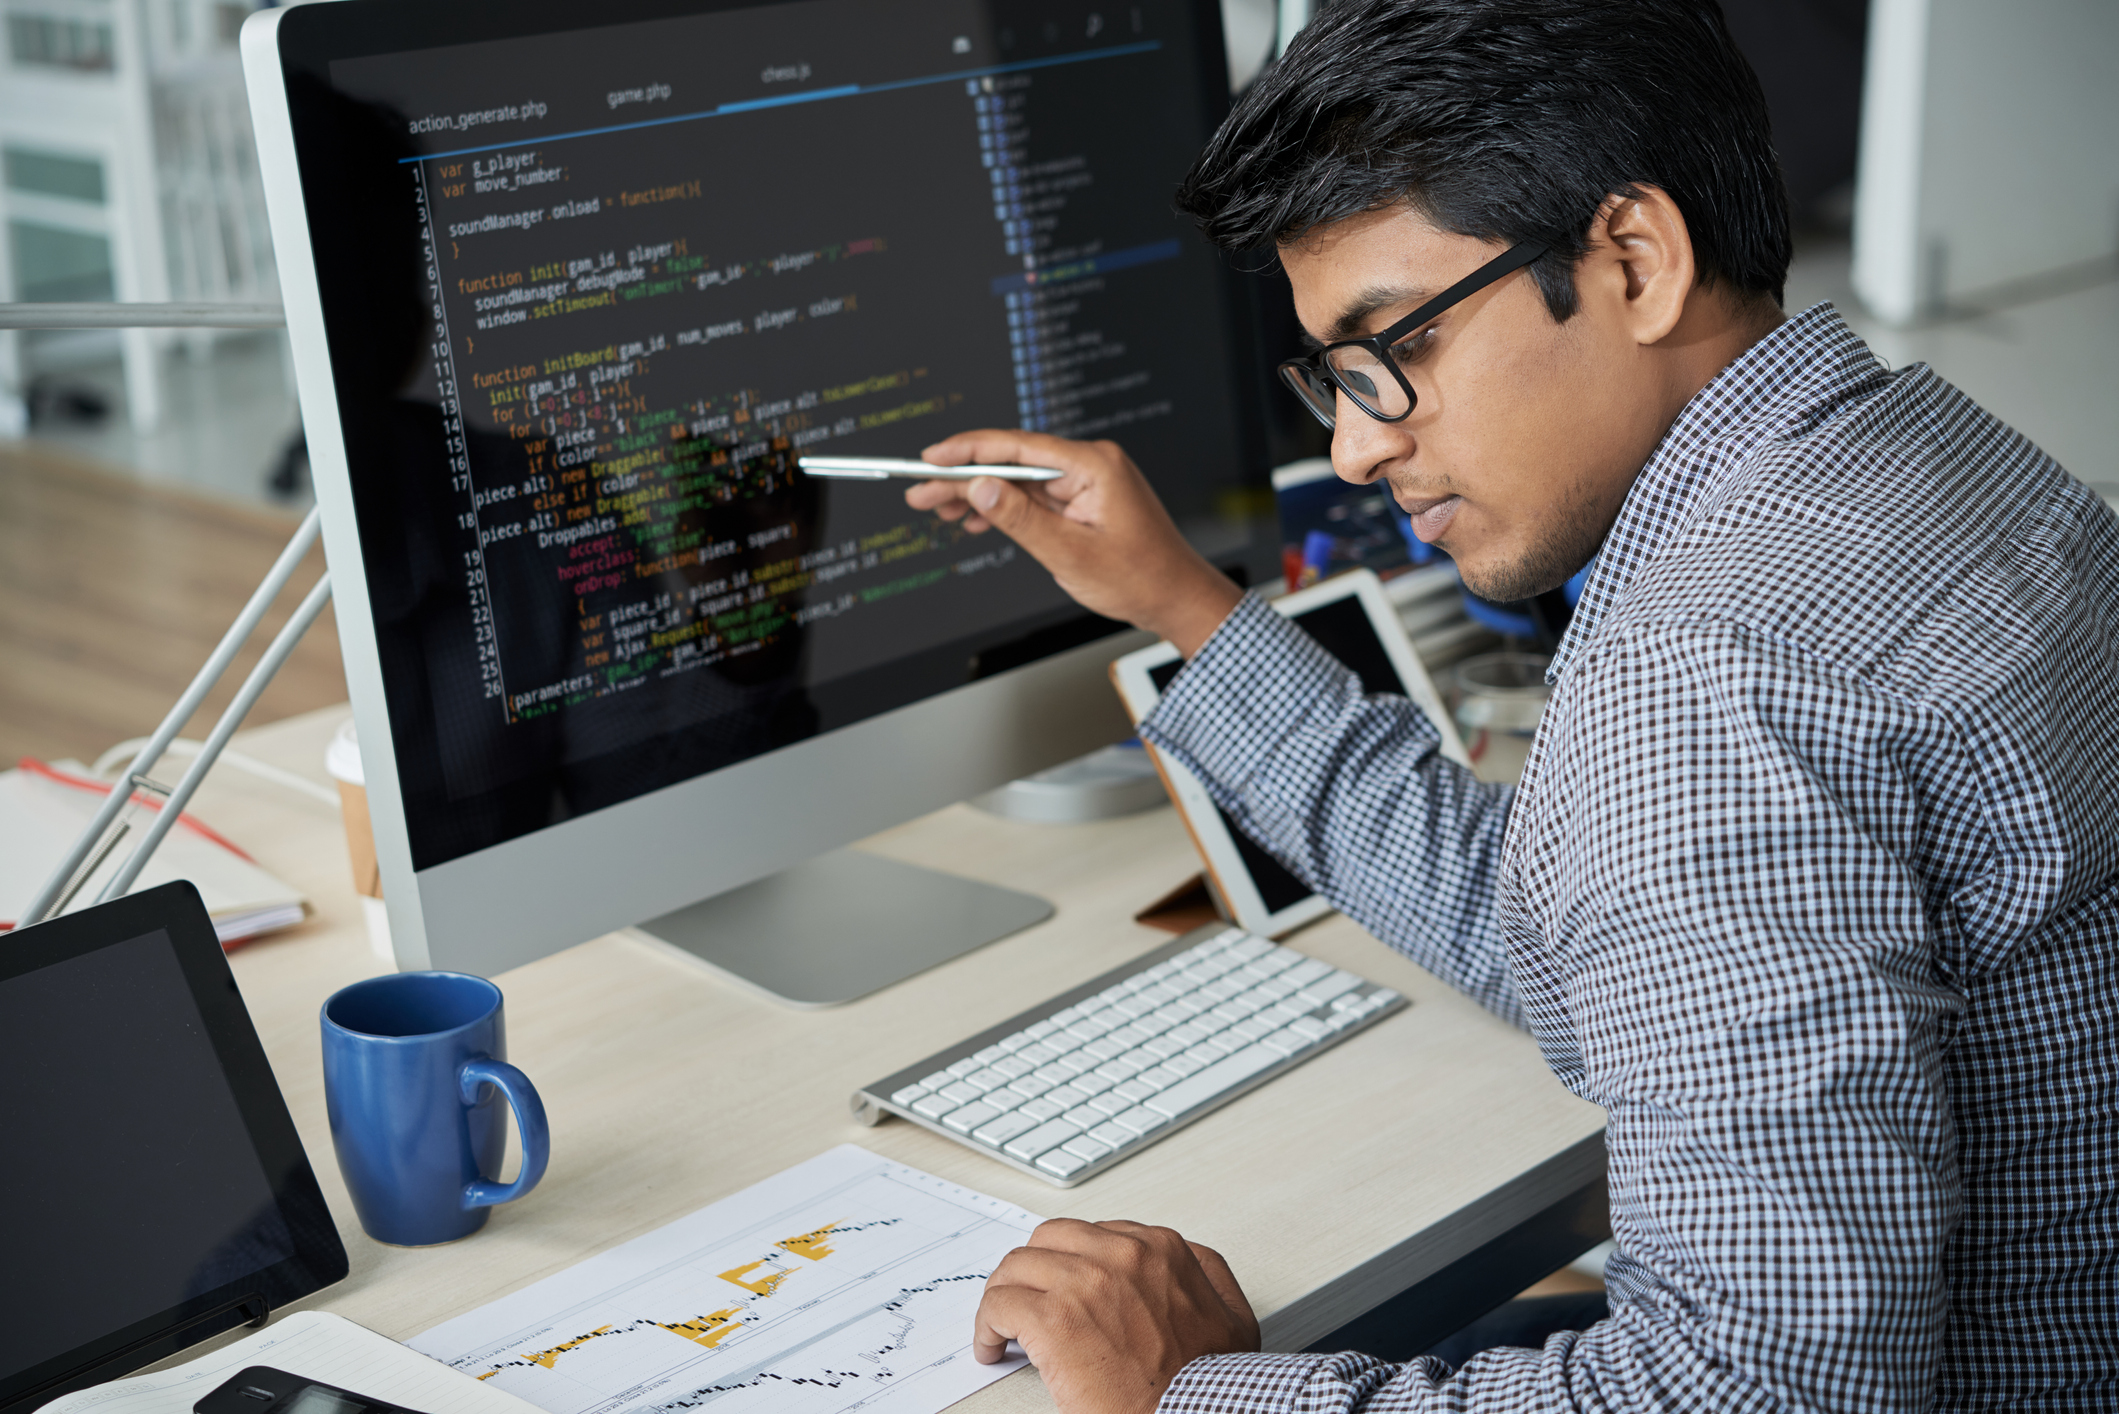 Man looking at data on a piece of paper while referencing code on a screen